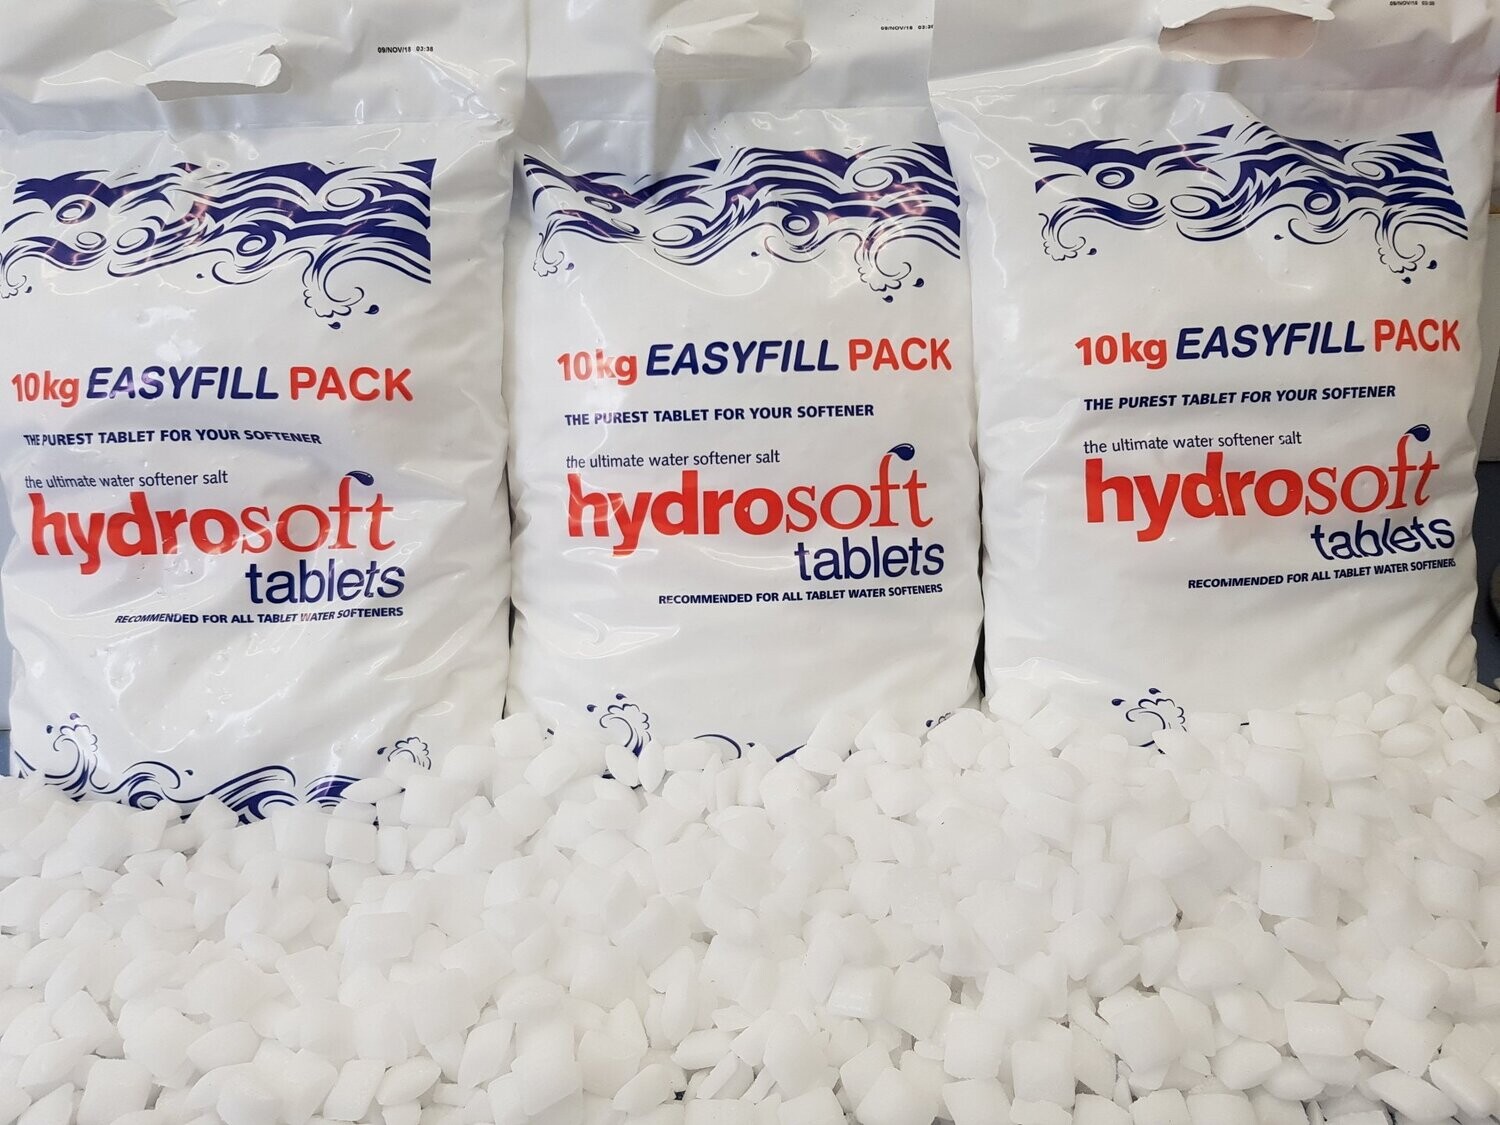 1 - 5 Bags x 10kg Hydrosoft Easyfill Tablet Salt - £7.50 per bag collected  - From